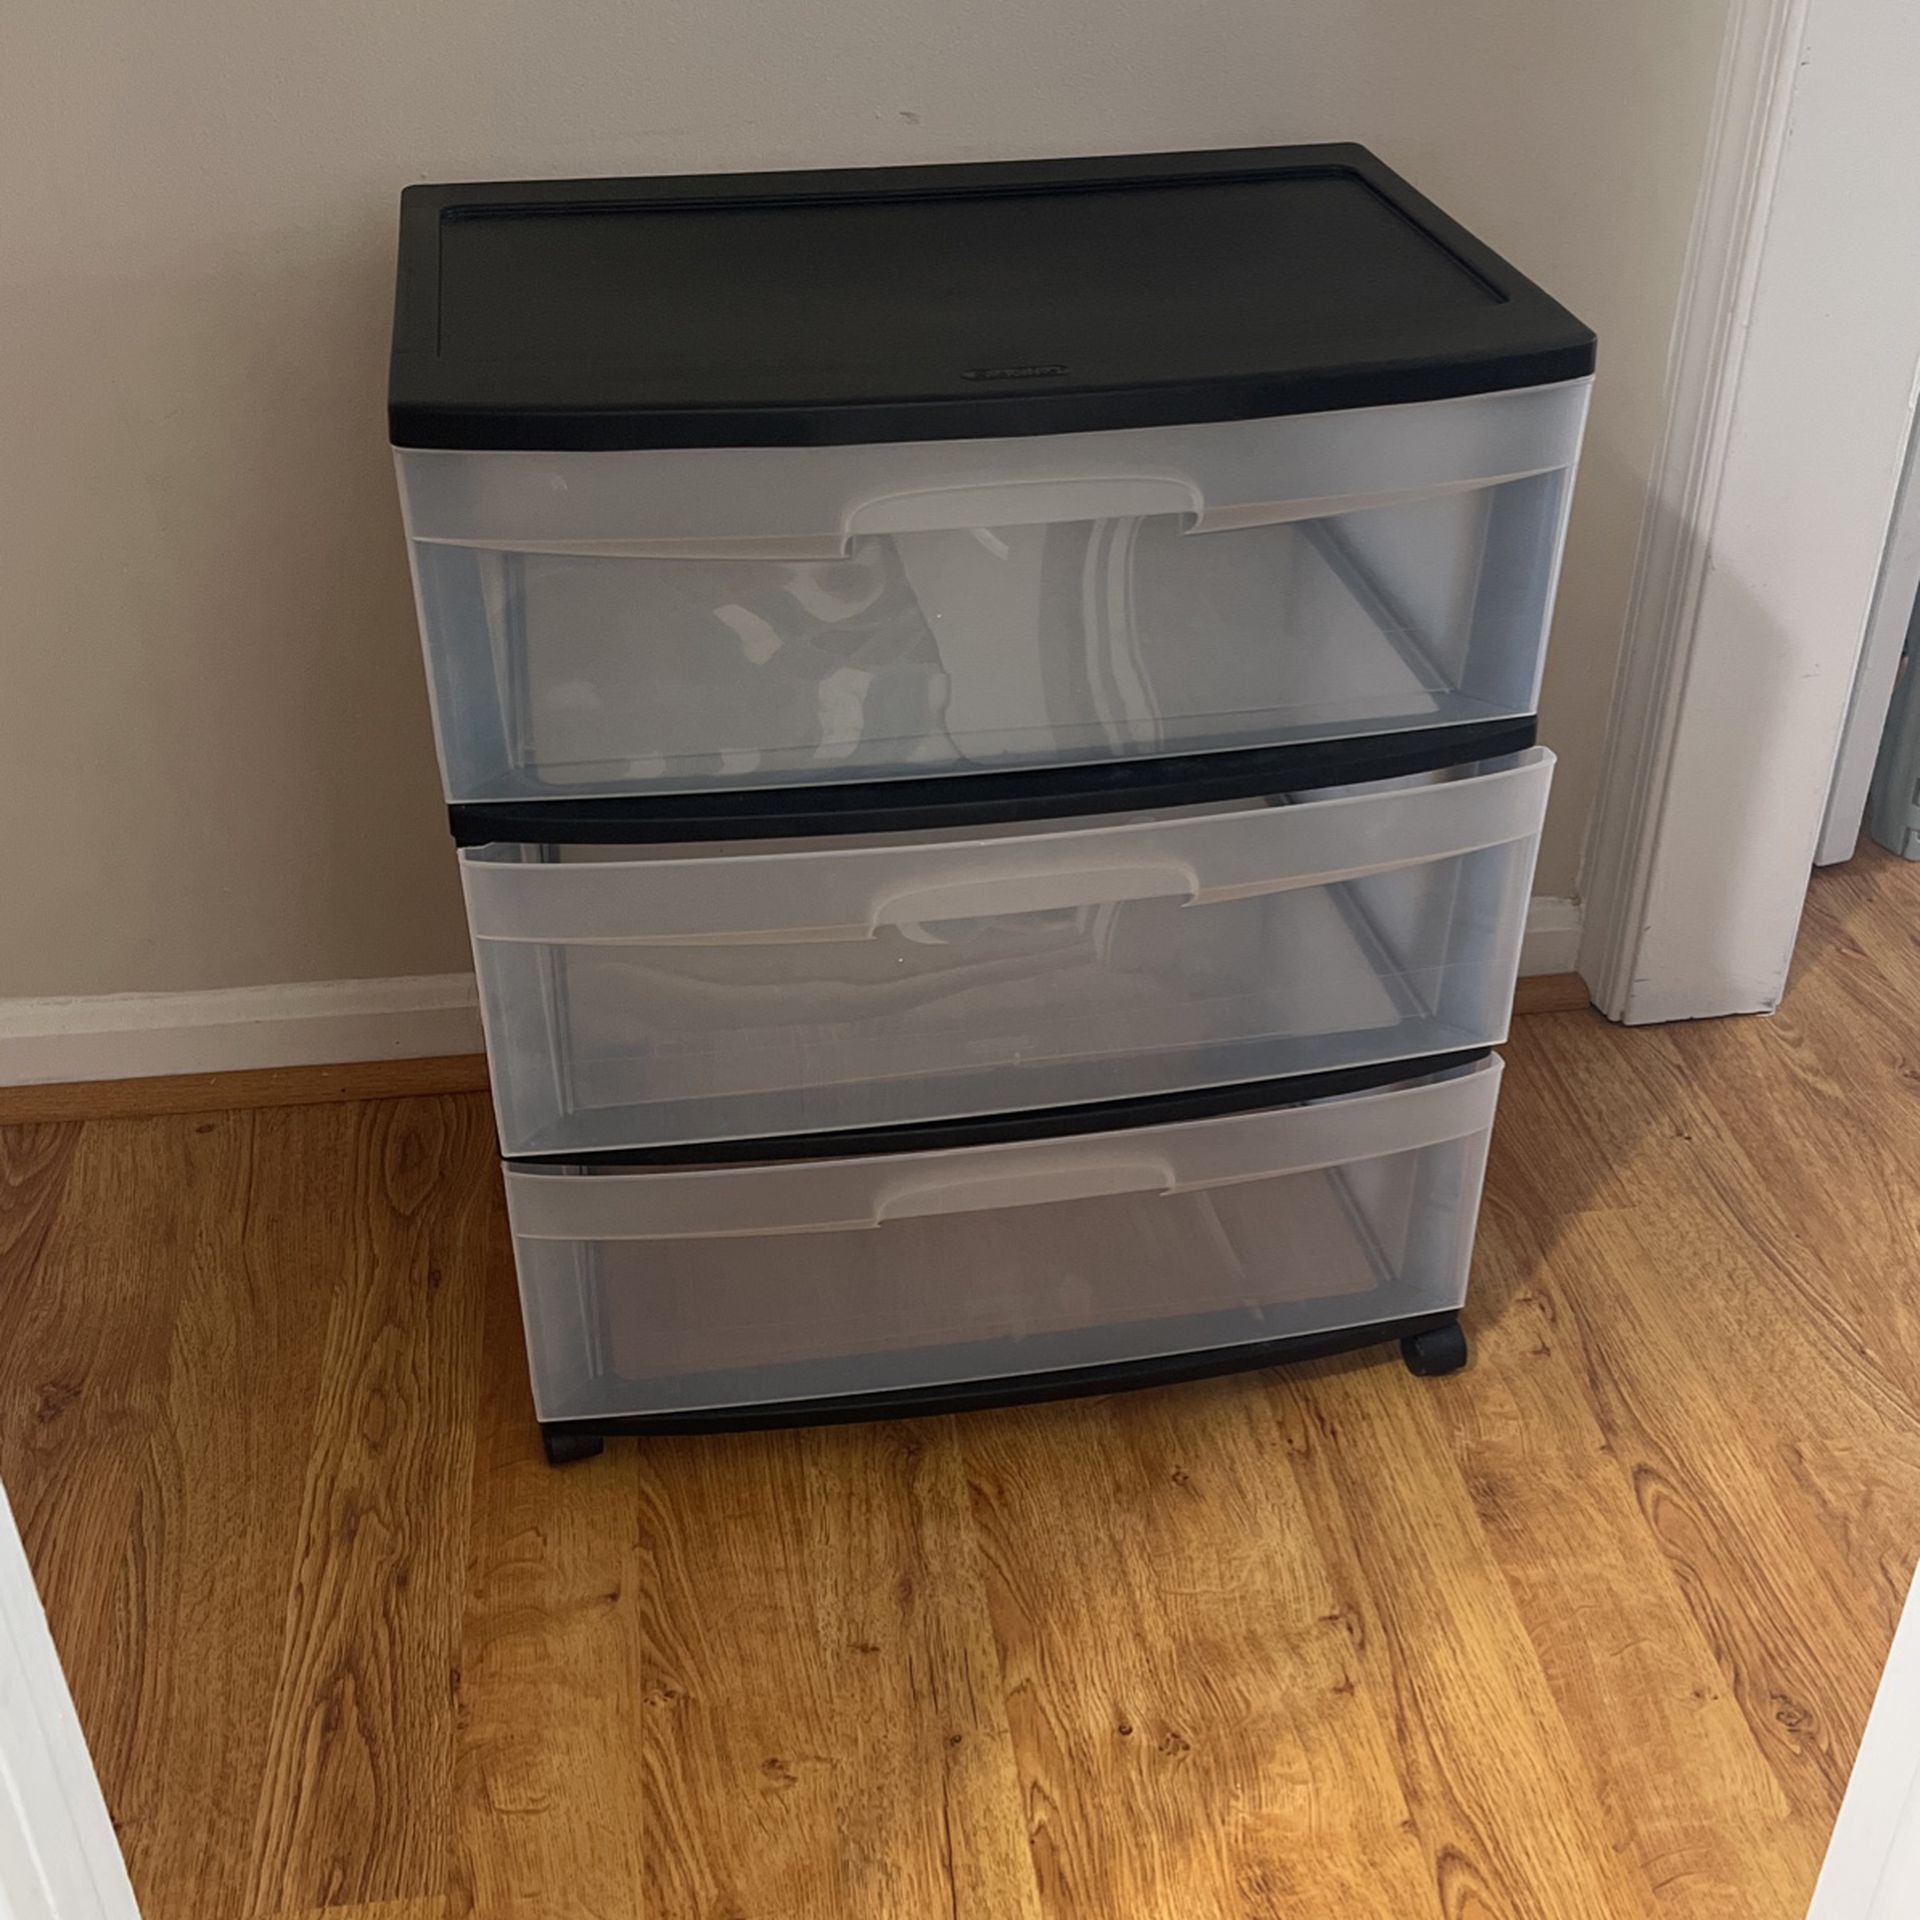 Must Sell Today- Black plastic Drawers/ Dresser With Wheels 